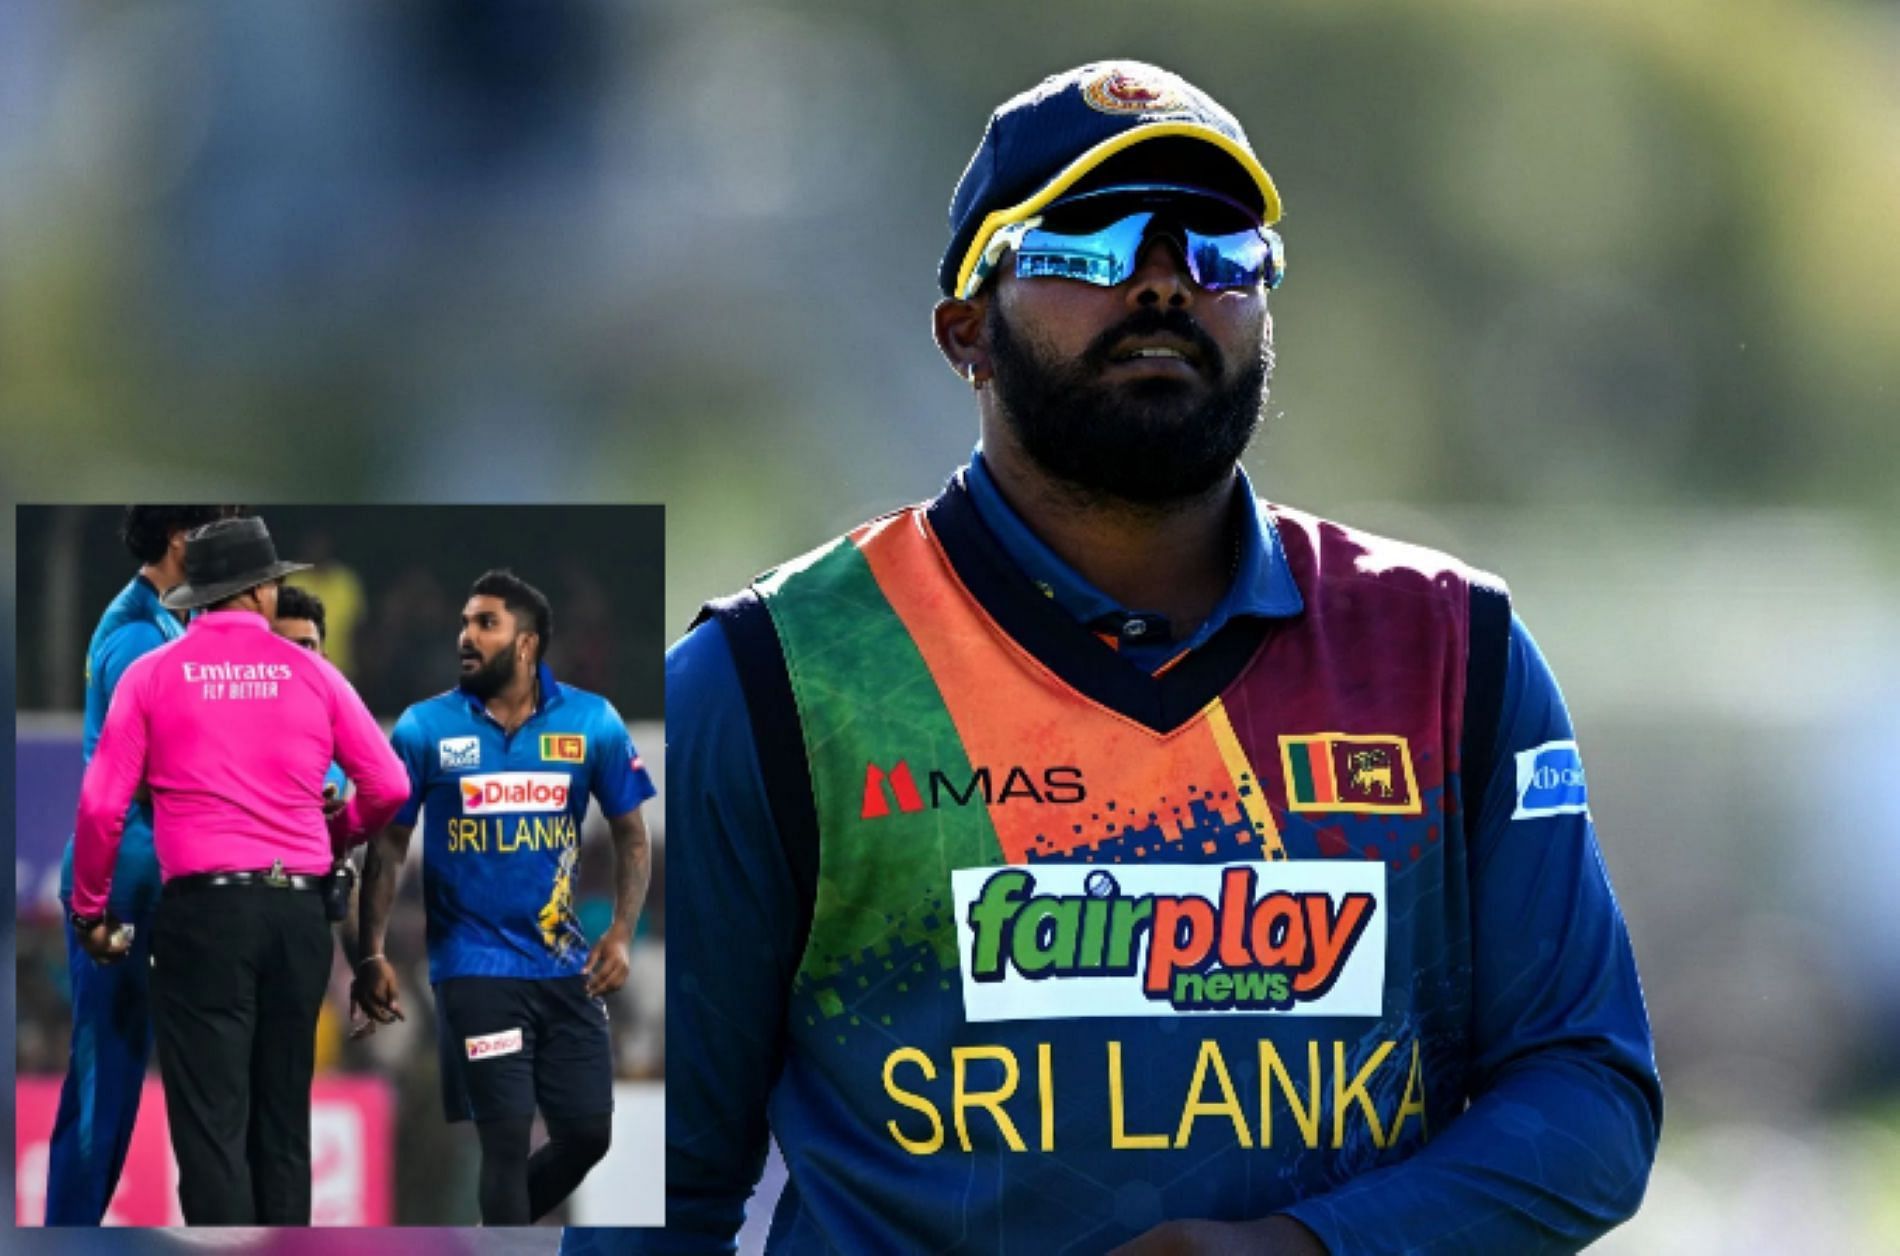 The missed call proved crucial in Sri Lanka